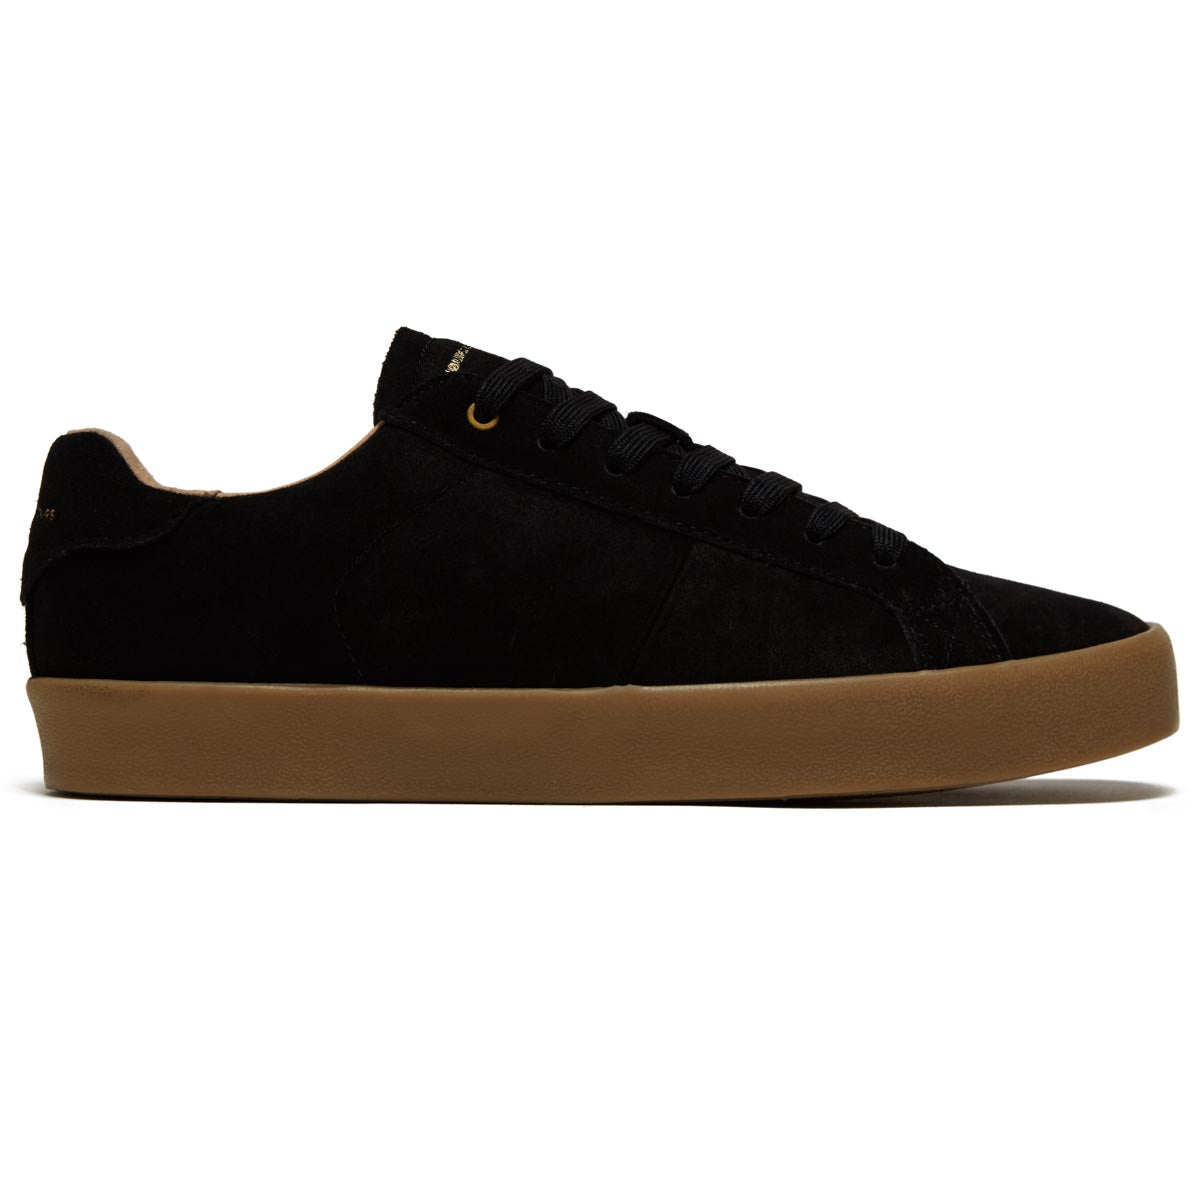 Hours Is Yours C71 Shoes - Black/Gum image 1